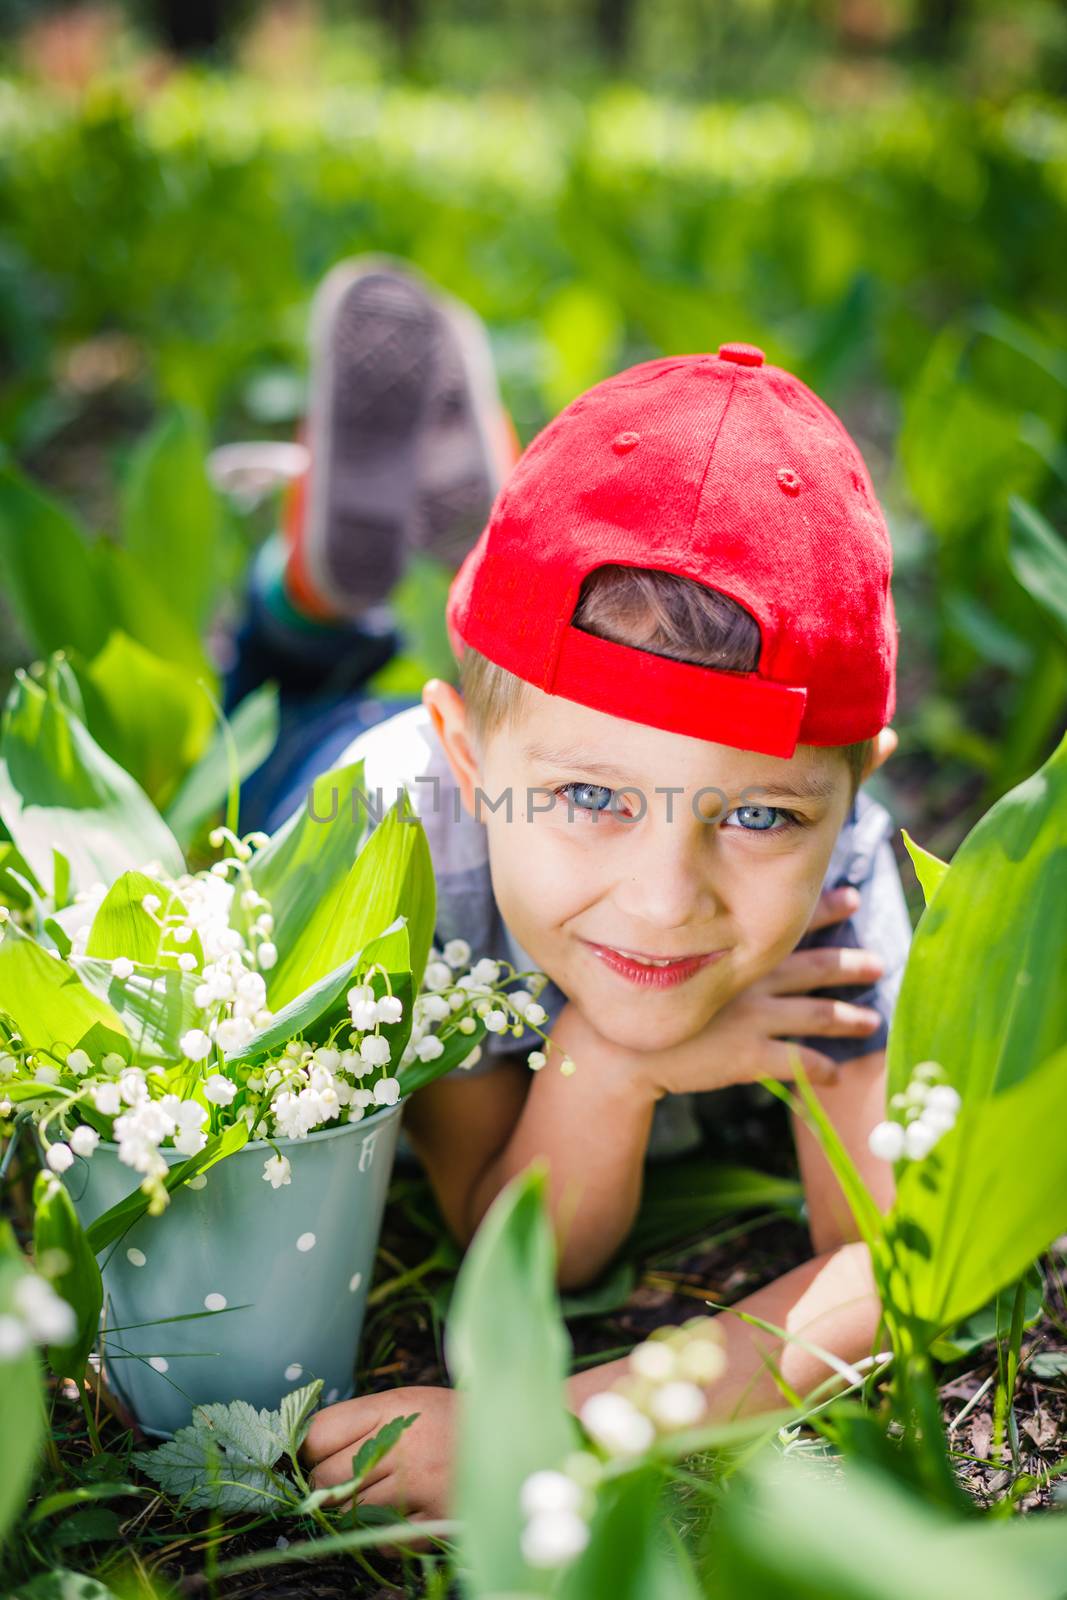 Spring in the forest. A cute boy with lilies of the valley